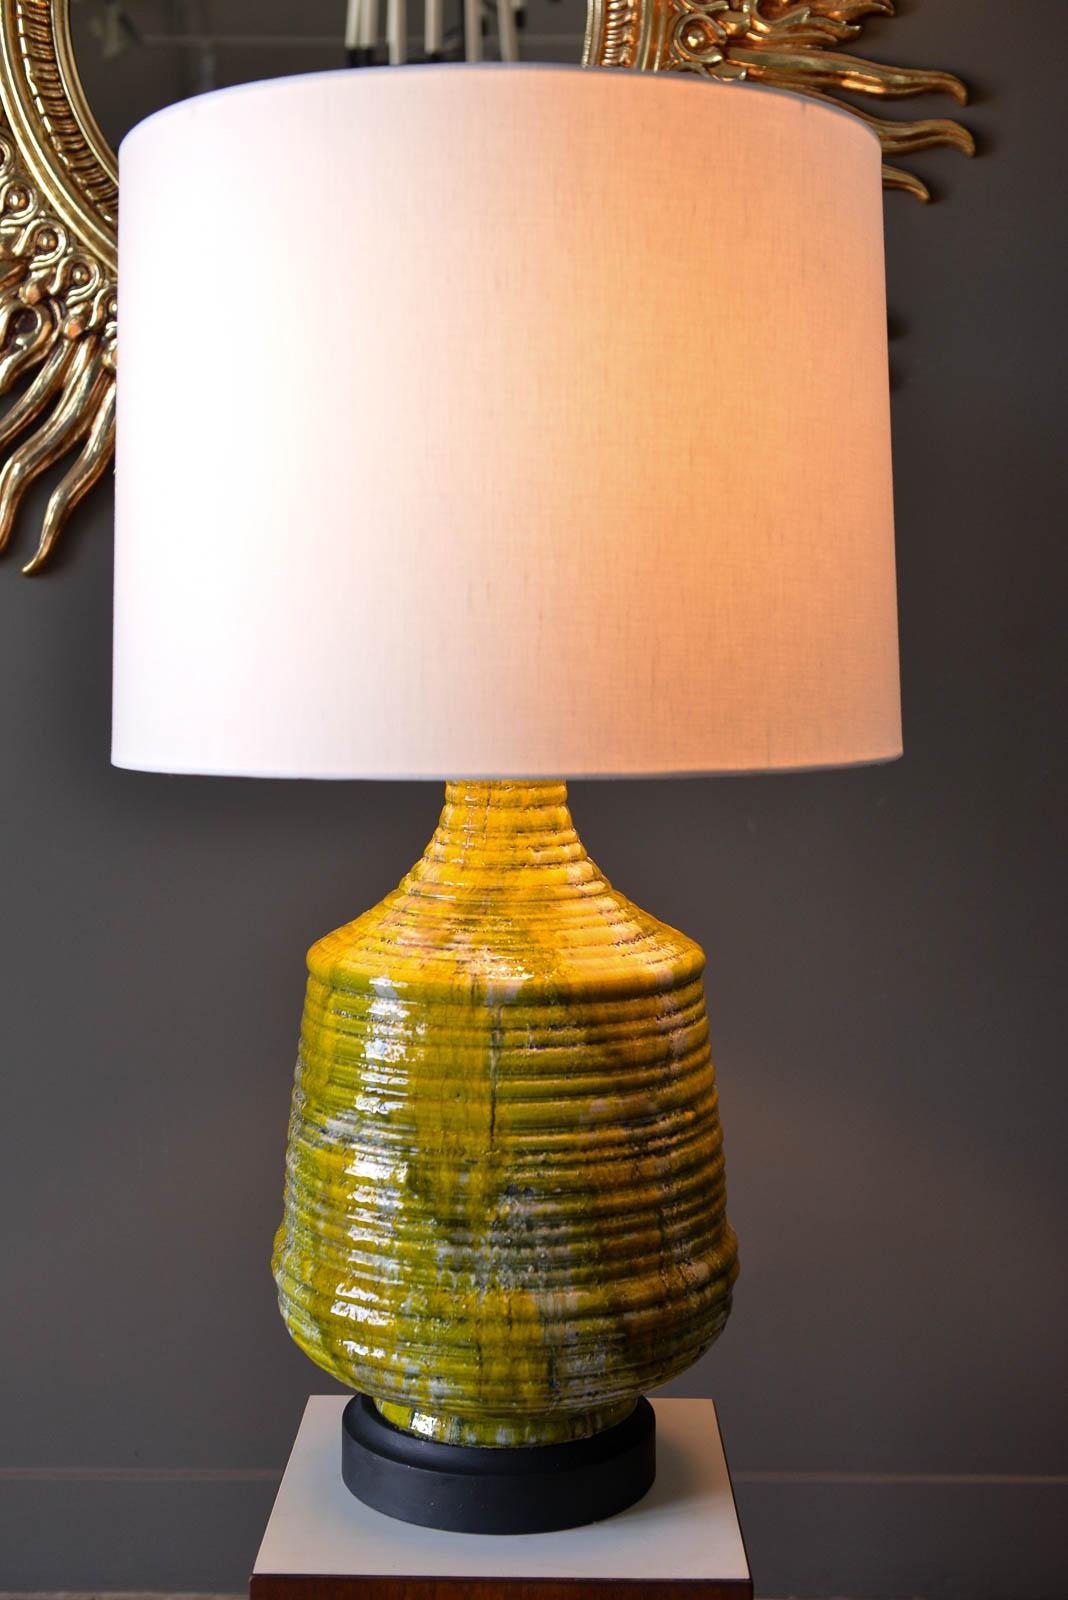 Large textured ceramic table lamp, circa 1975. Original wiring in good condition, with beautiful colors in the ceramic glaze. Some crazing to the lamp, however no chips or cracks. Unsigned. Good working order.

Measures: 13